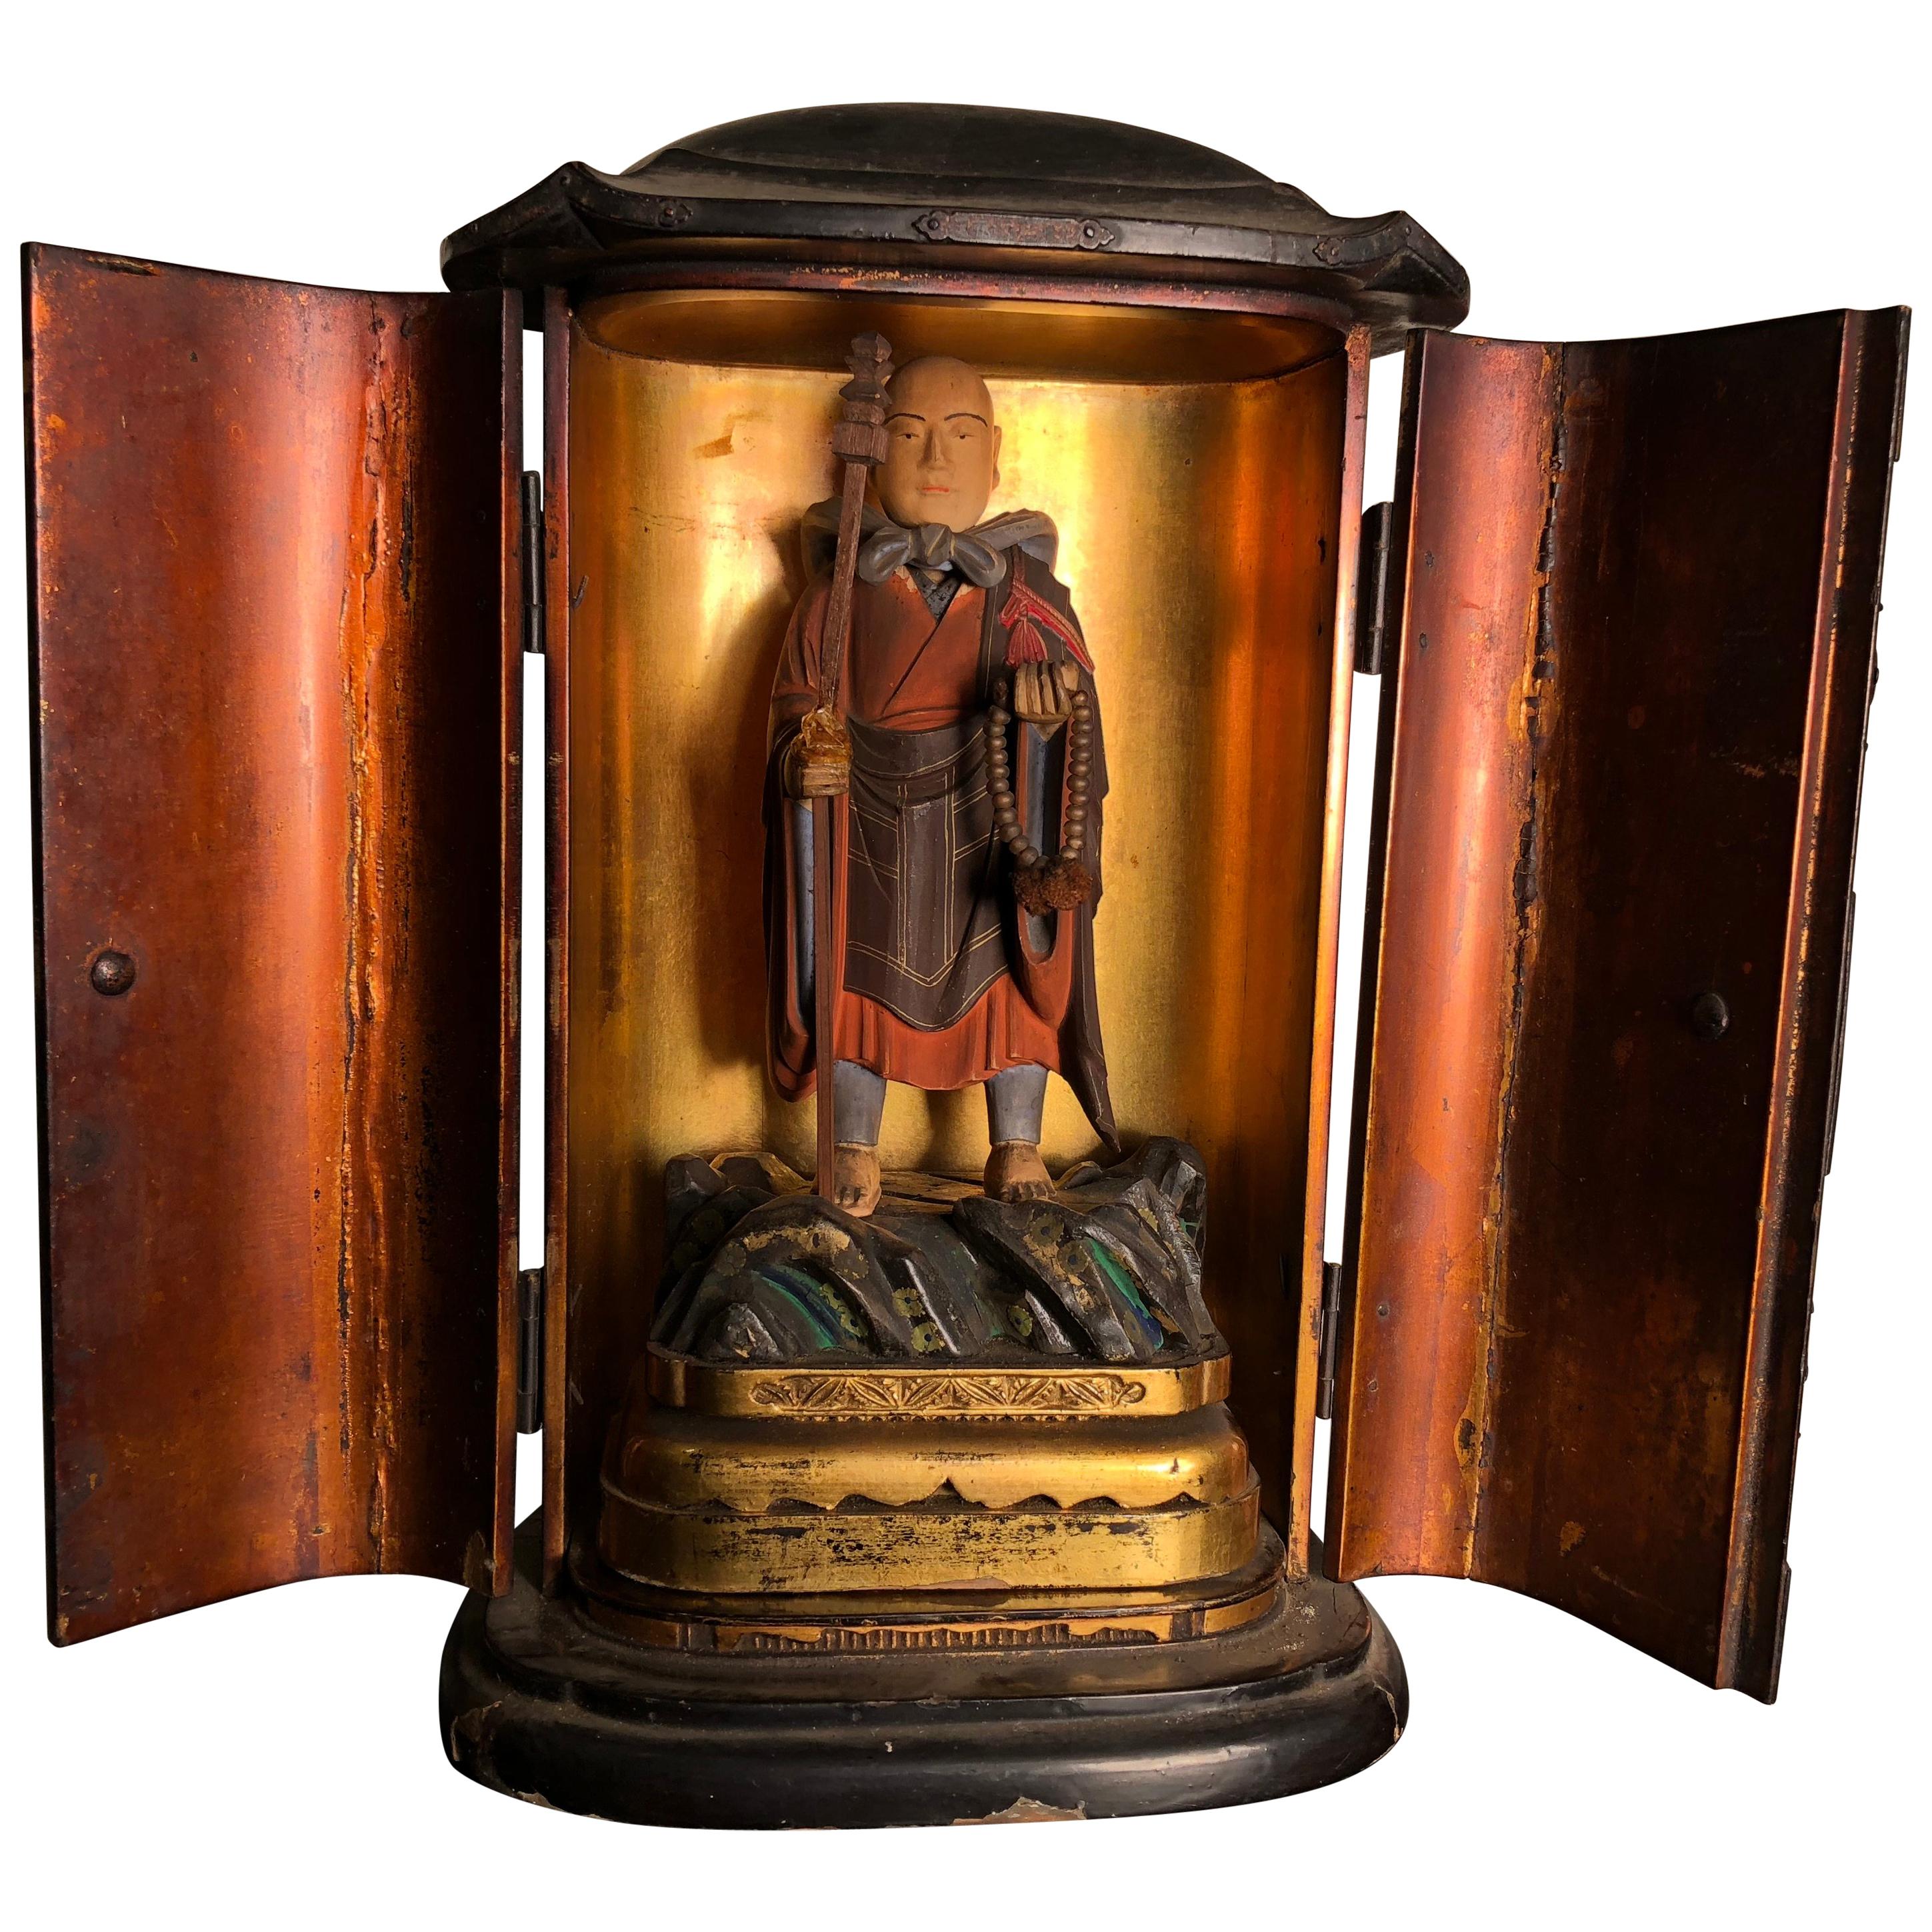 Japan Fine Old Buddhist Figure in Original Gold and Black Lacquer Box , Zushi